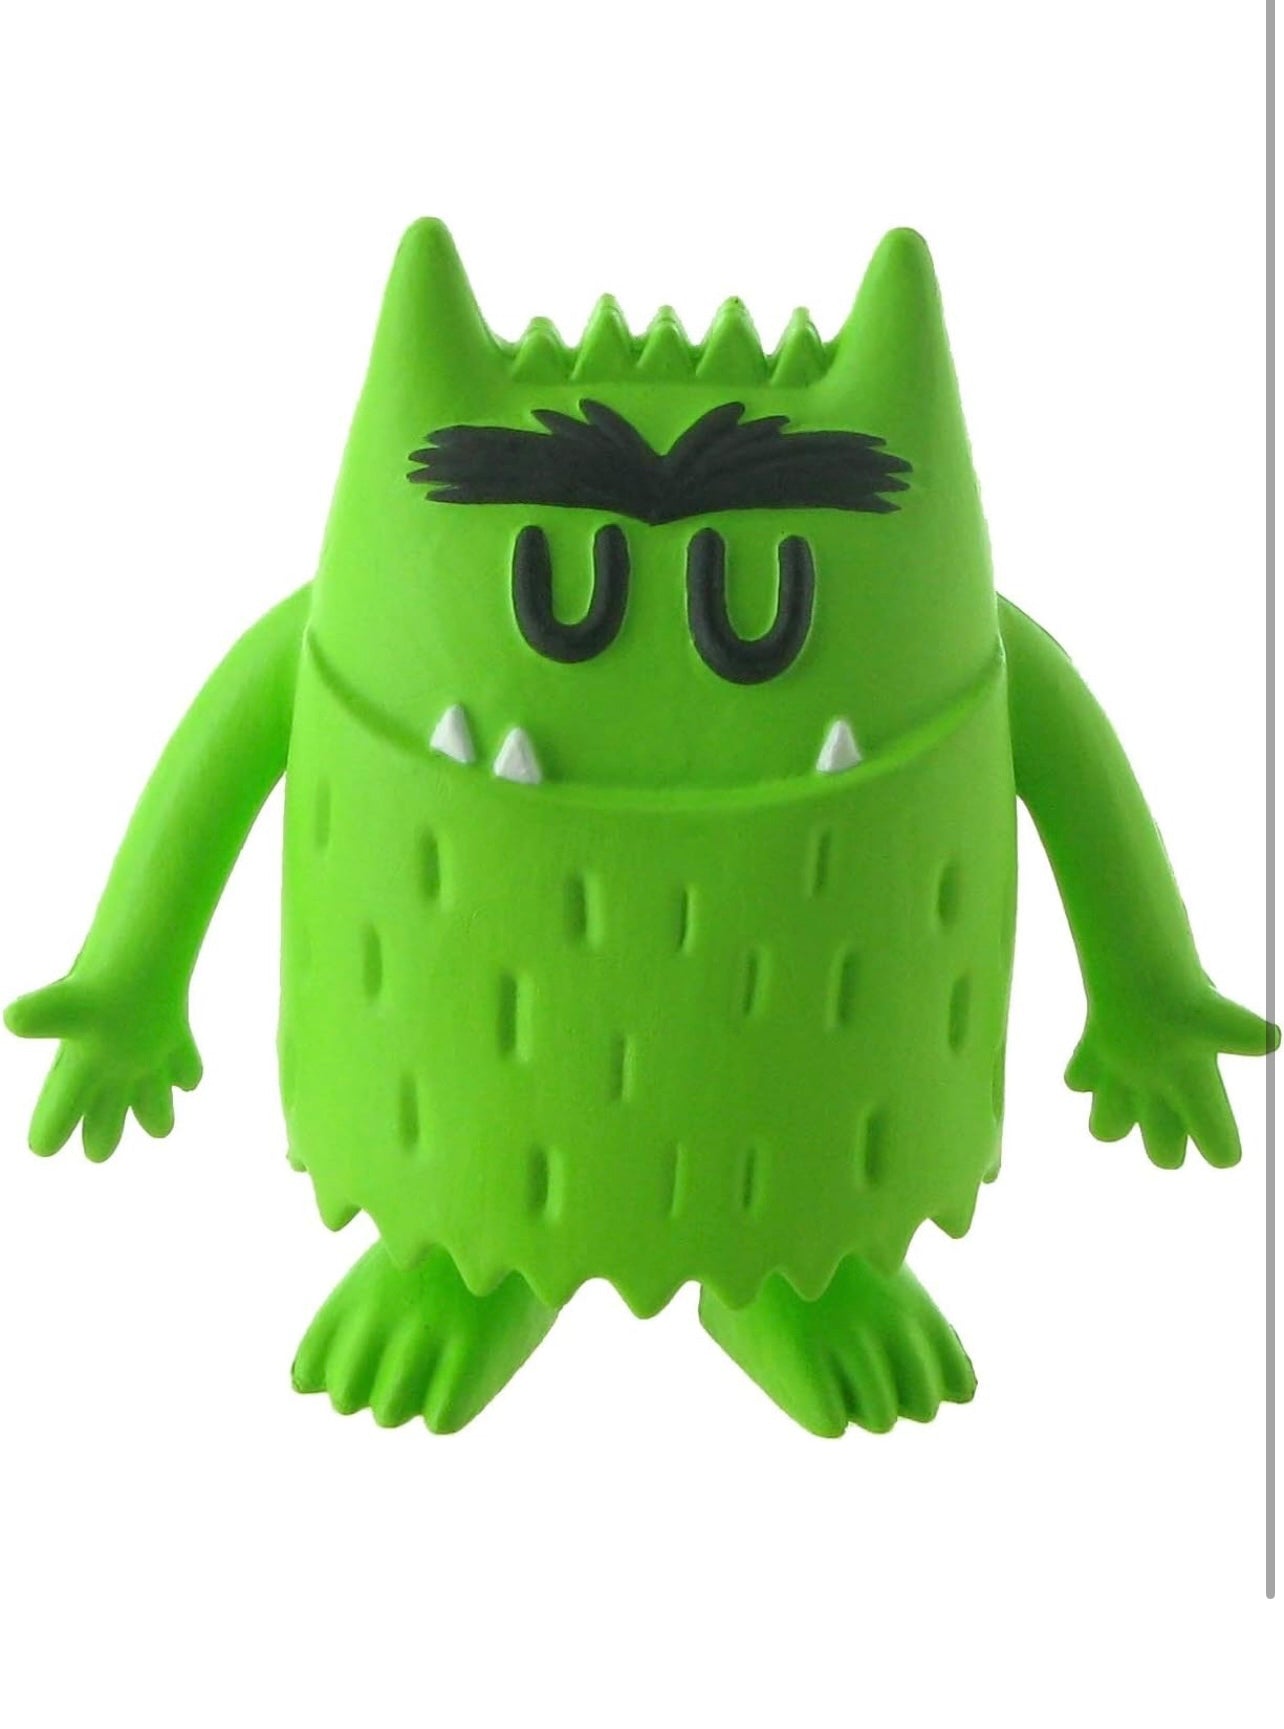 Colour Monster Emotions Figurines